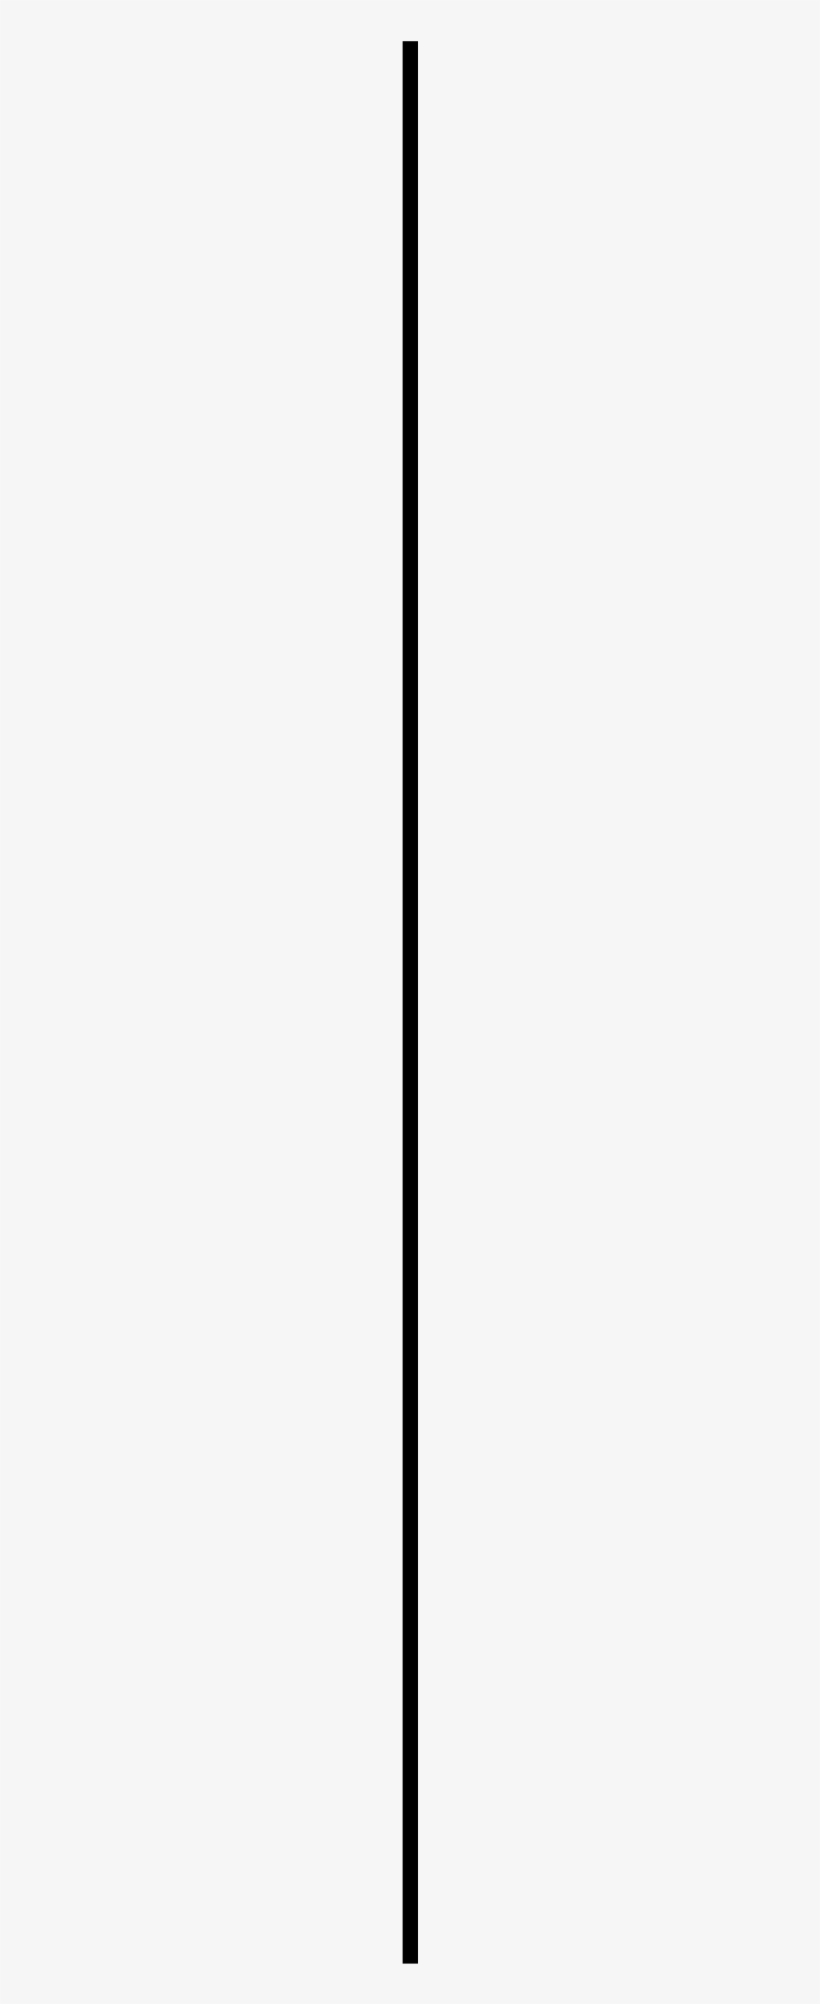 Animated Vertical Line